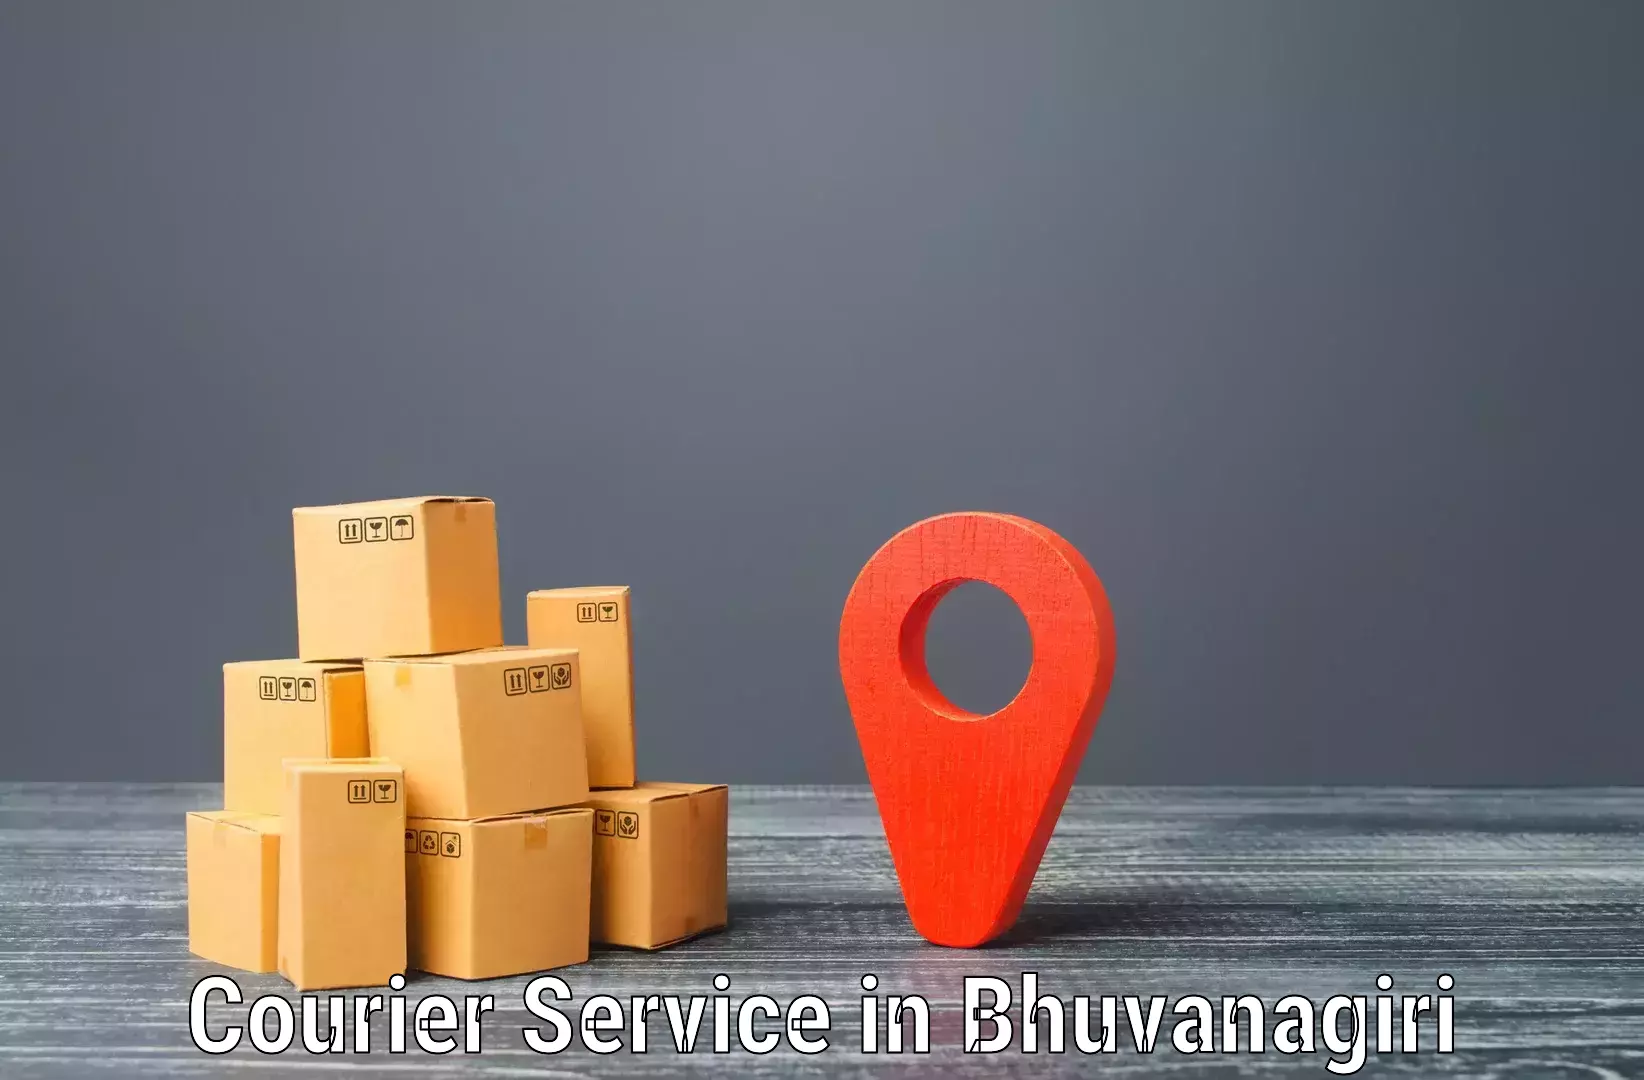 Express delivery solutions in Bhuvanagiri